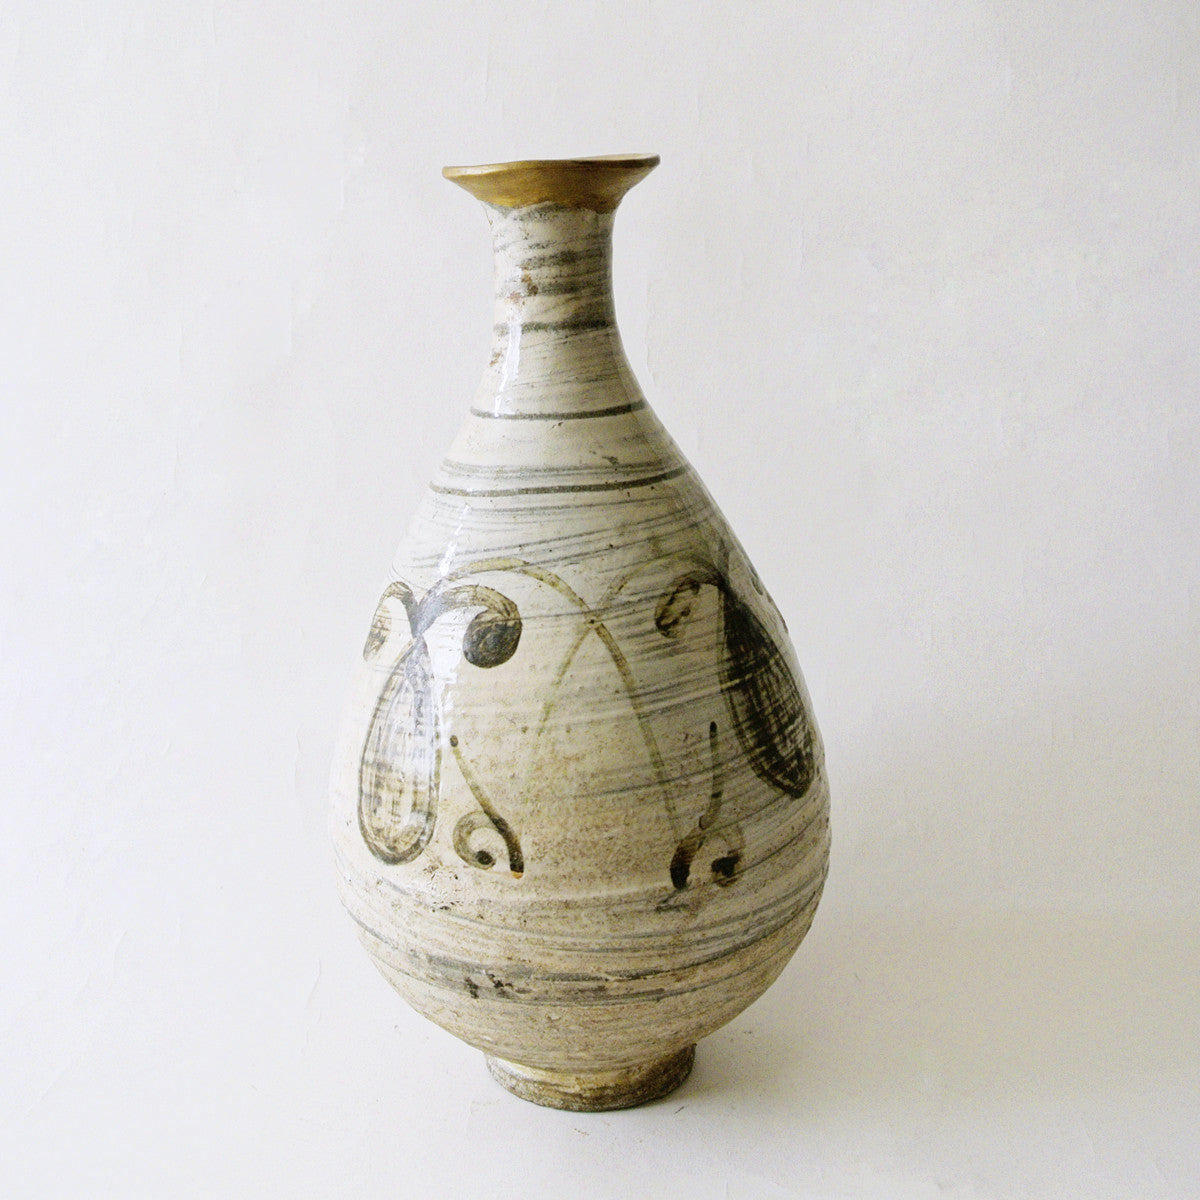 White Vase with Iron Glazed Design Bunchung 16c. from Chosun